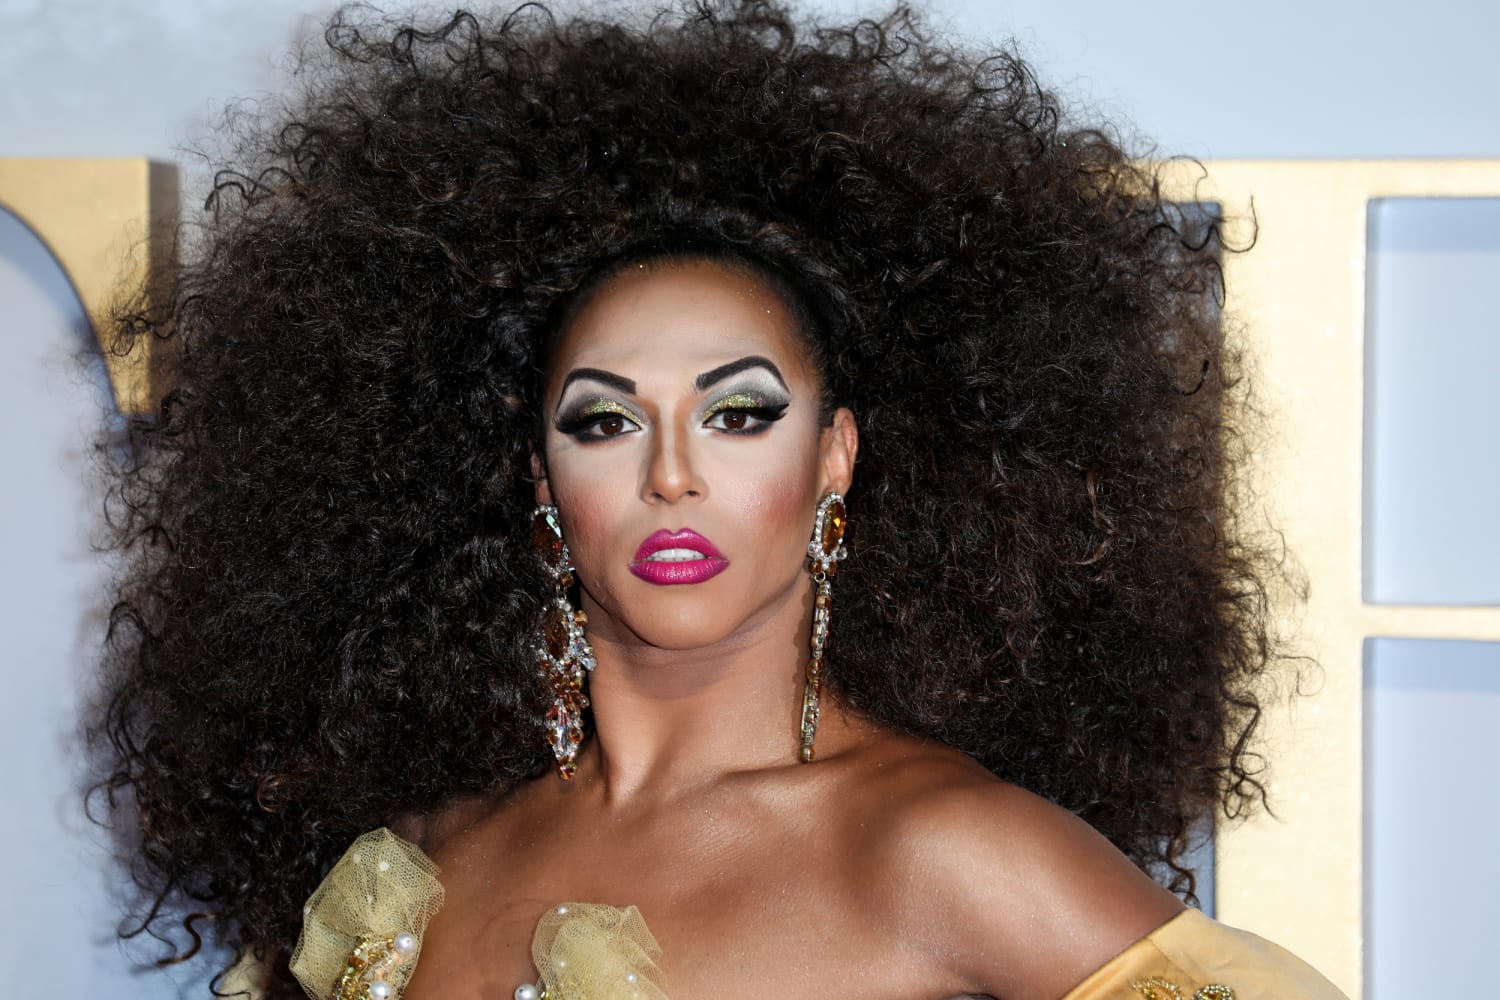 Drag Race star Shangela accused of rape in new lawsuit image picture